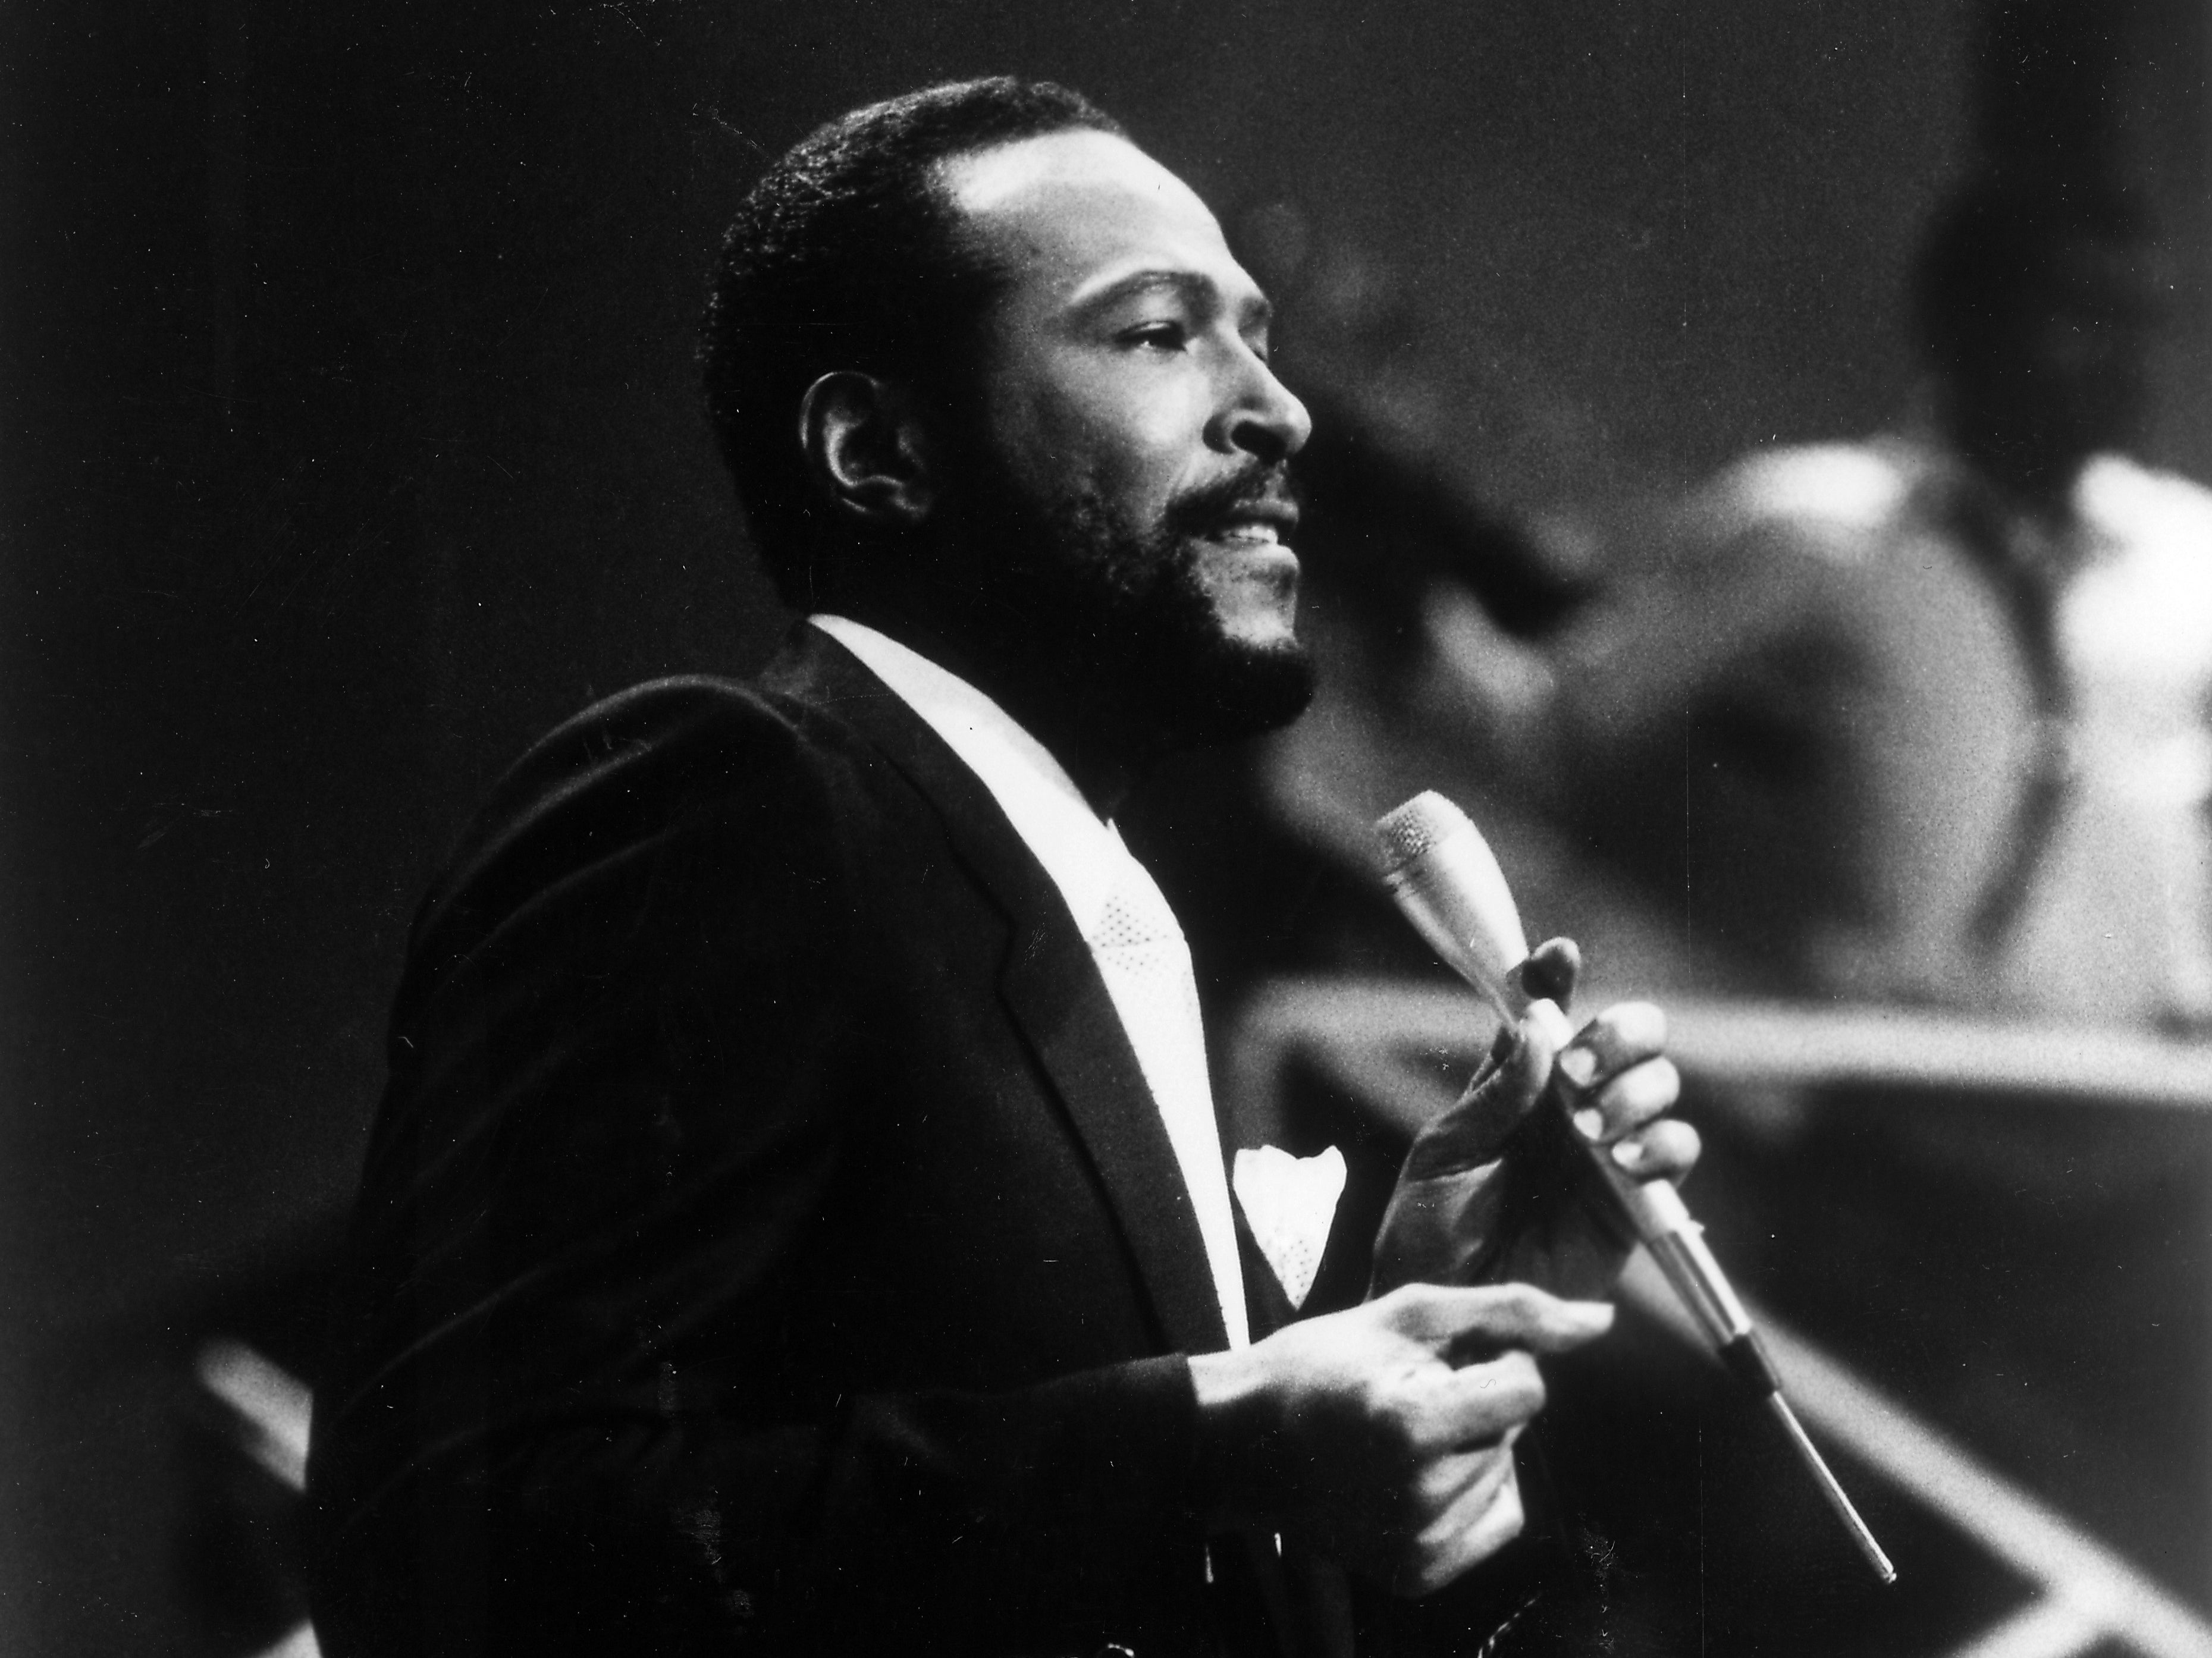 Marvin Gaye singing on stage in 1970